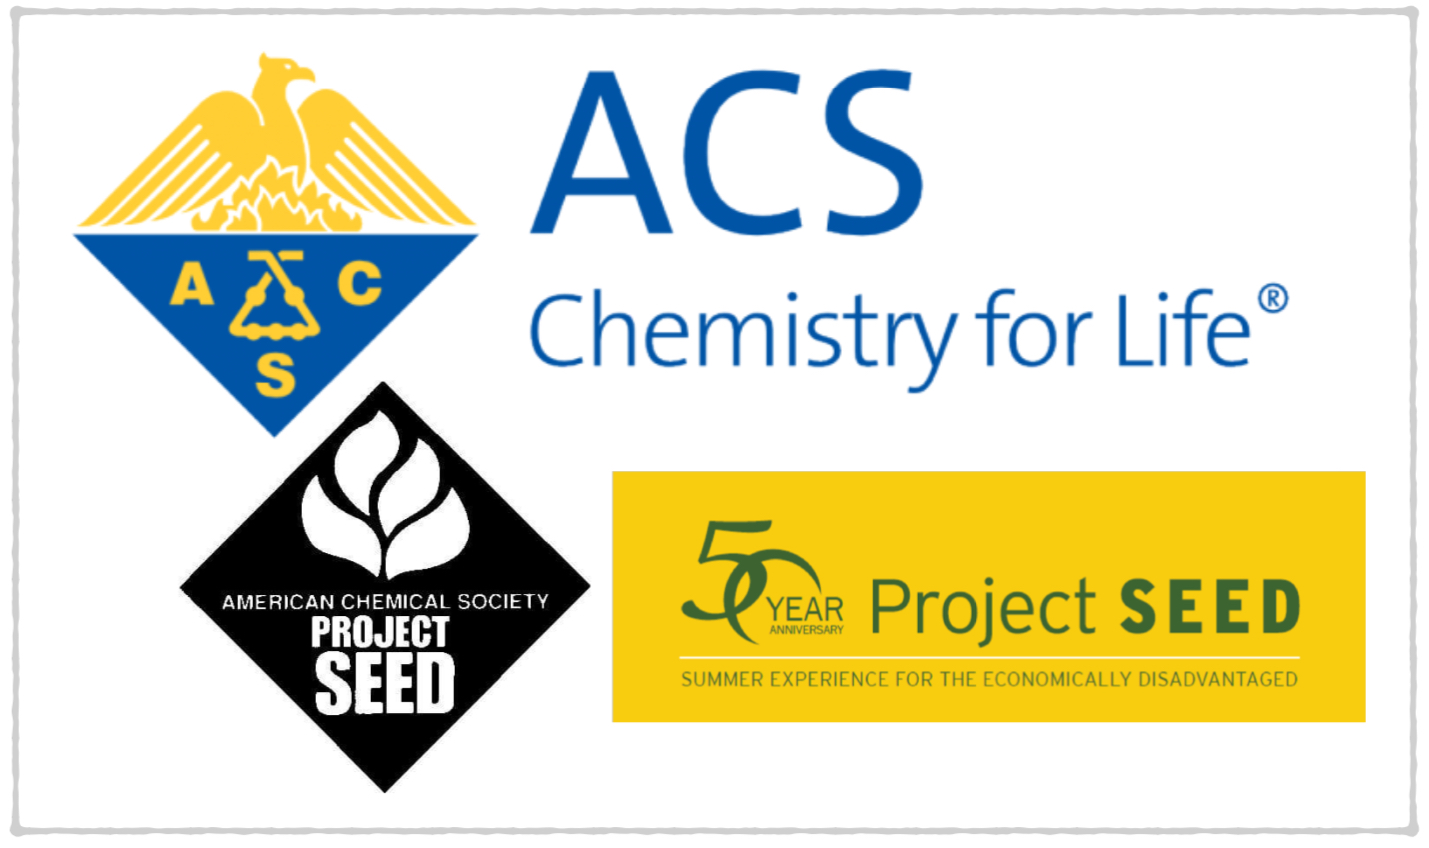 ACS project SEED